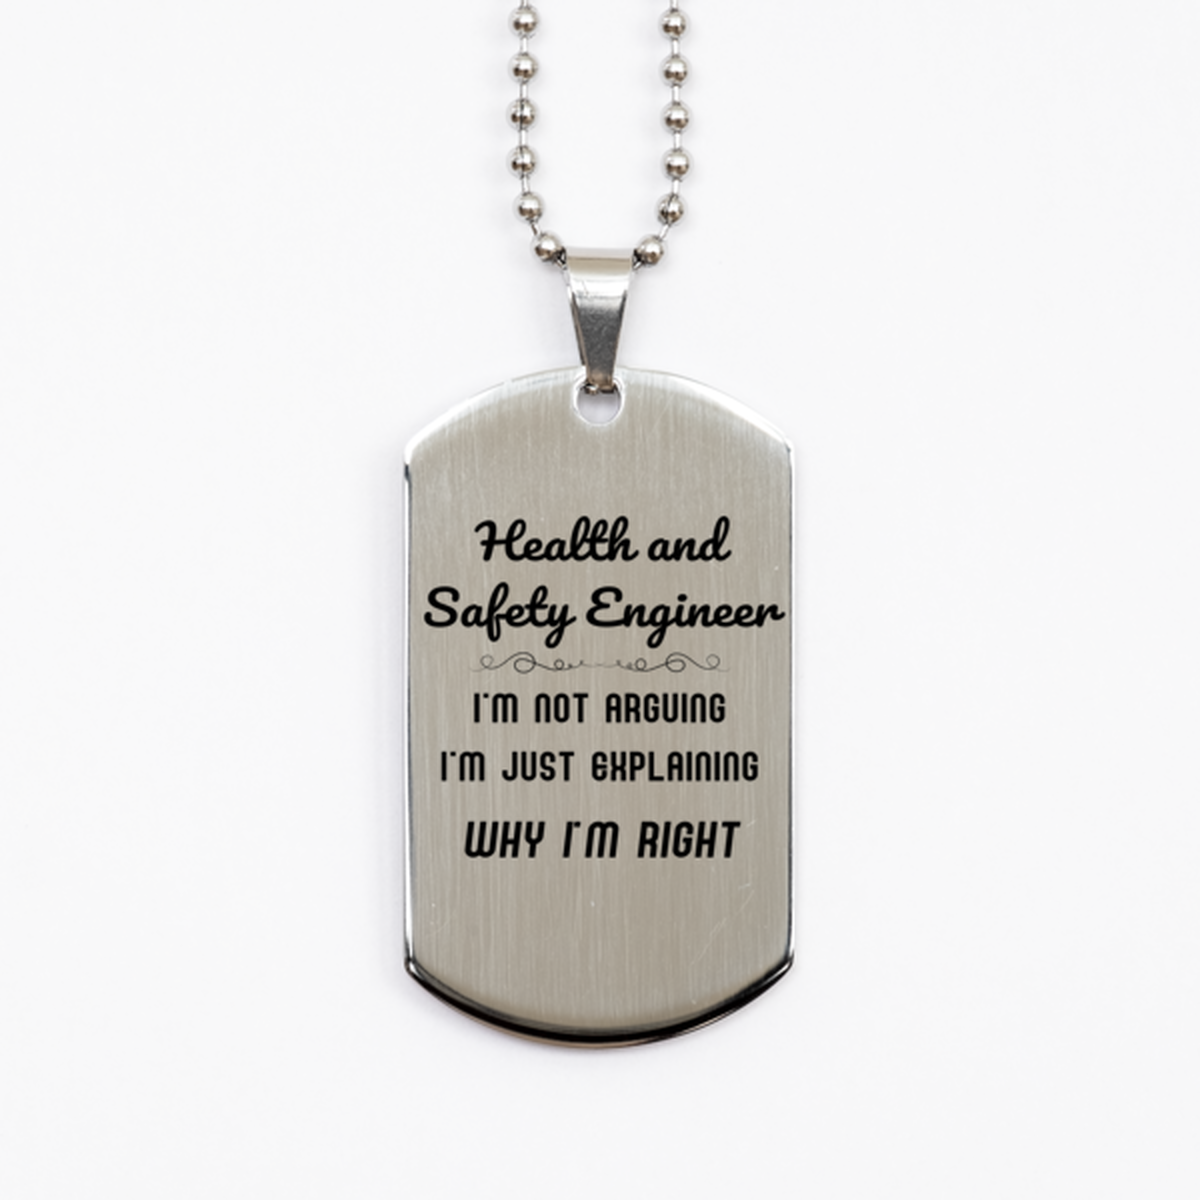 Health and Safety Engineer I'm not Arguing. I'm Just Explaining Why I'm RIGHT Silver Dog Tag, Funny Saying Quote Health and Safety Engineer Gifts For Health and Safety Engineer Graduation Birthday Christmas Gifts for Men Women Coworker